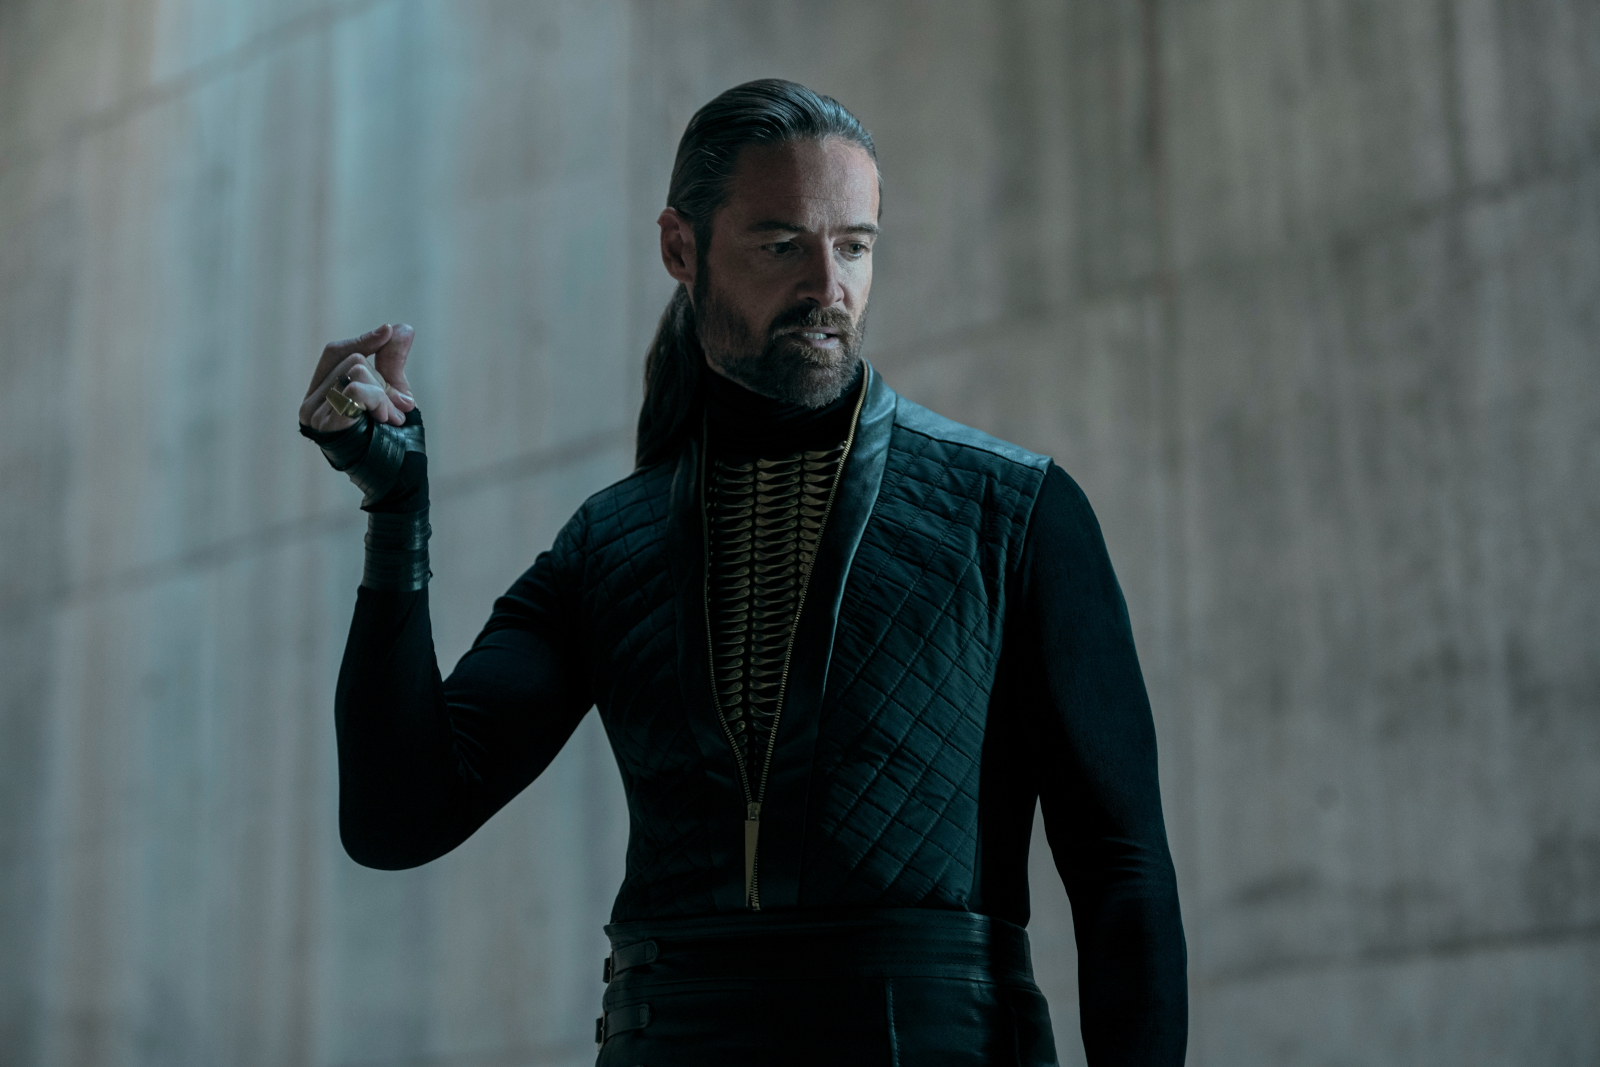 Actor William Miller as Adriel in 'Warrior Nun' Season 2. He's wearing black, has his hair pulled into a ponytail, and looks like he's about to snap his fingers.